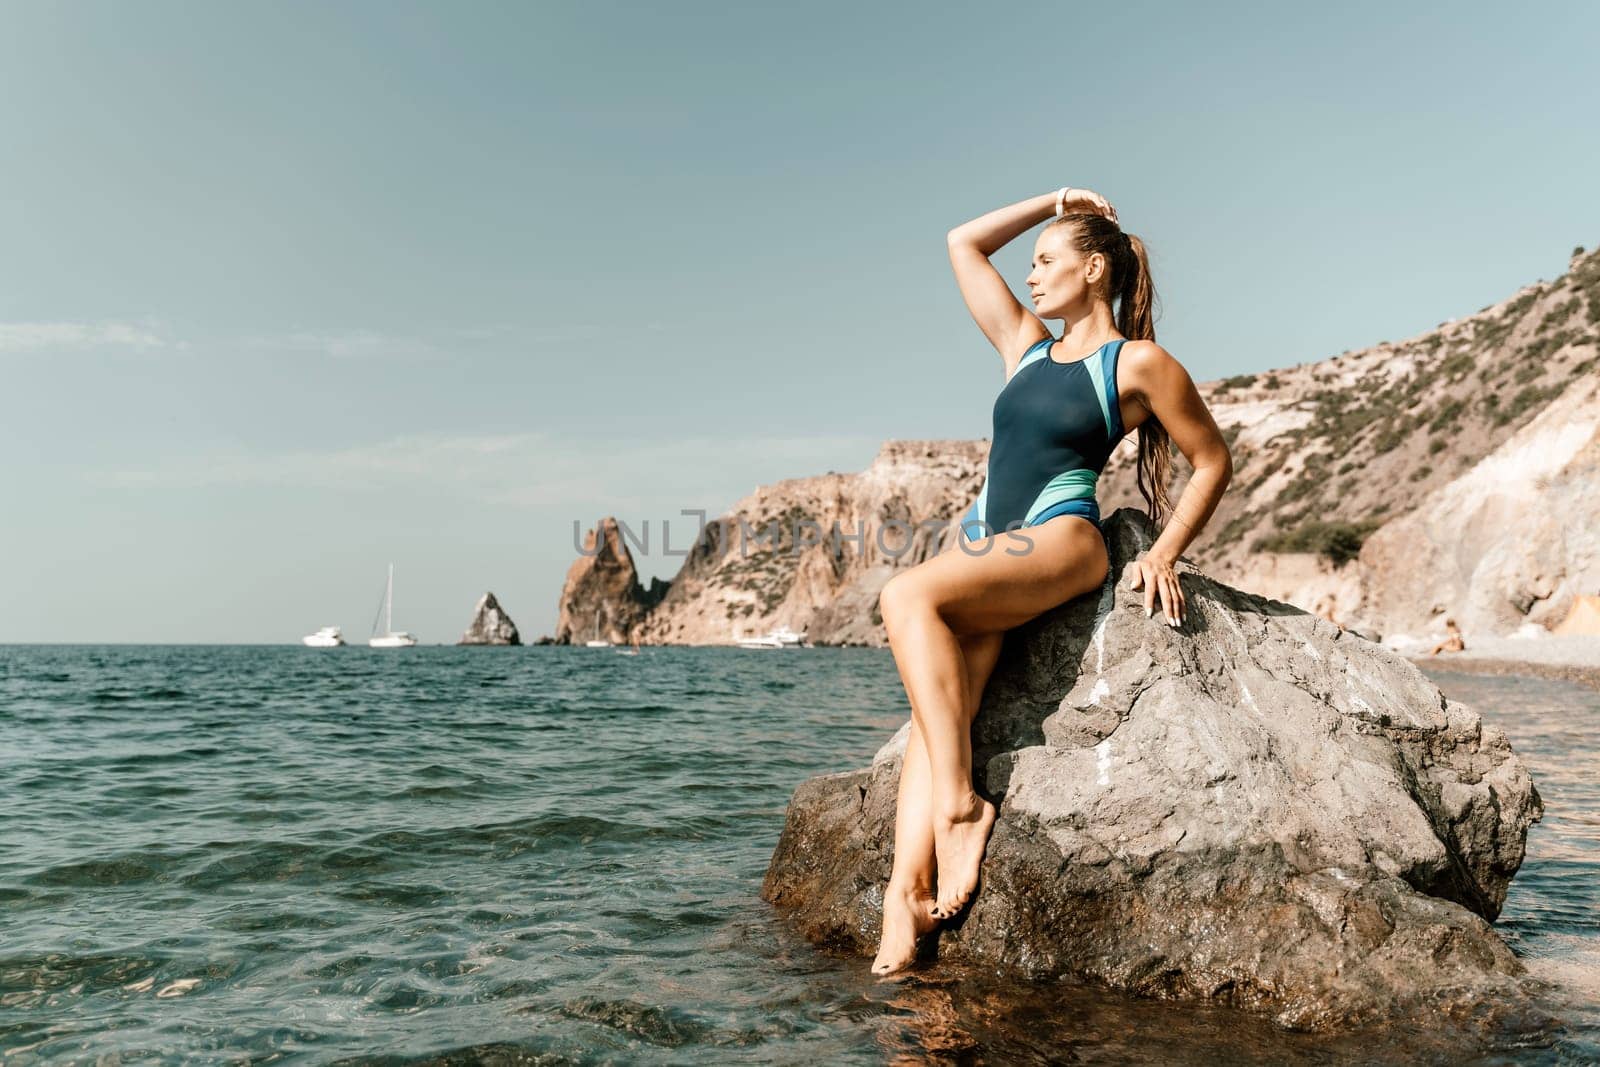 Woman beach vacation photo. A happy tourist in a blue bikini enjoying the scenic view of the sea and volcanic mountains while taking pictures to capture the memories of her travel adventure. by Matiunina